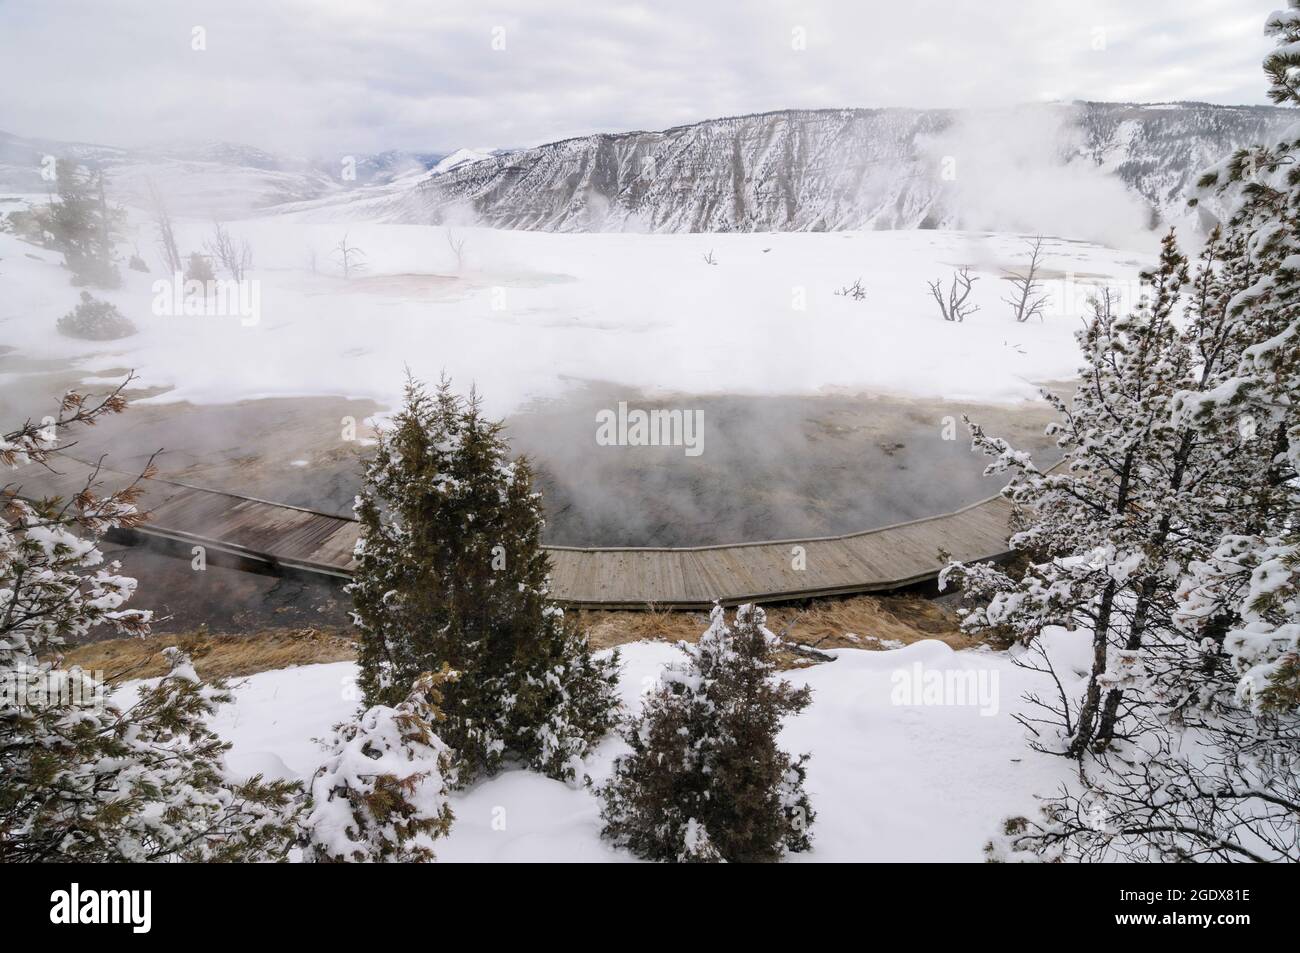 Boardwalk near hot steaming pools and trees in winter, Mammoth Hot Springs, Yellowstone Stock Photo